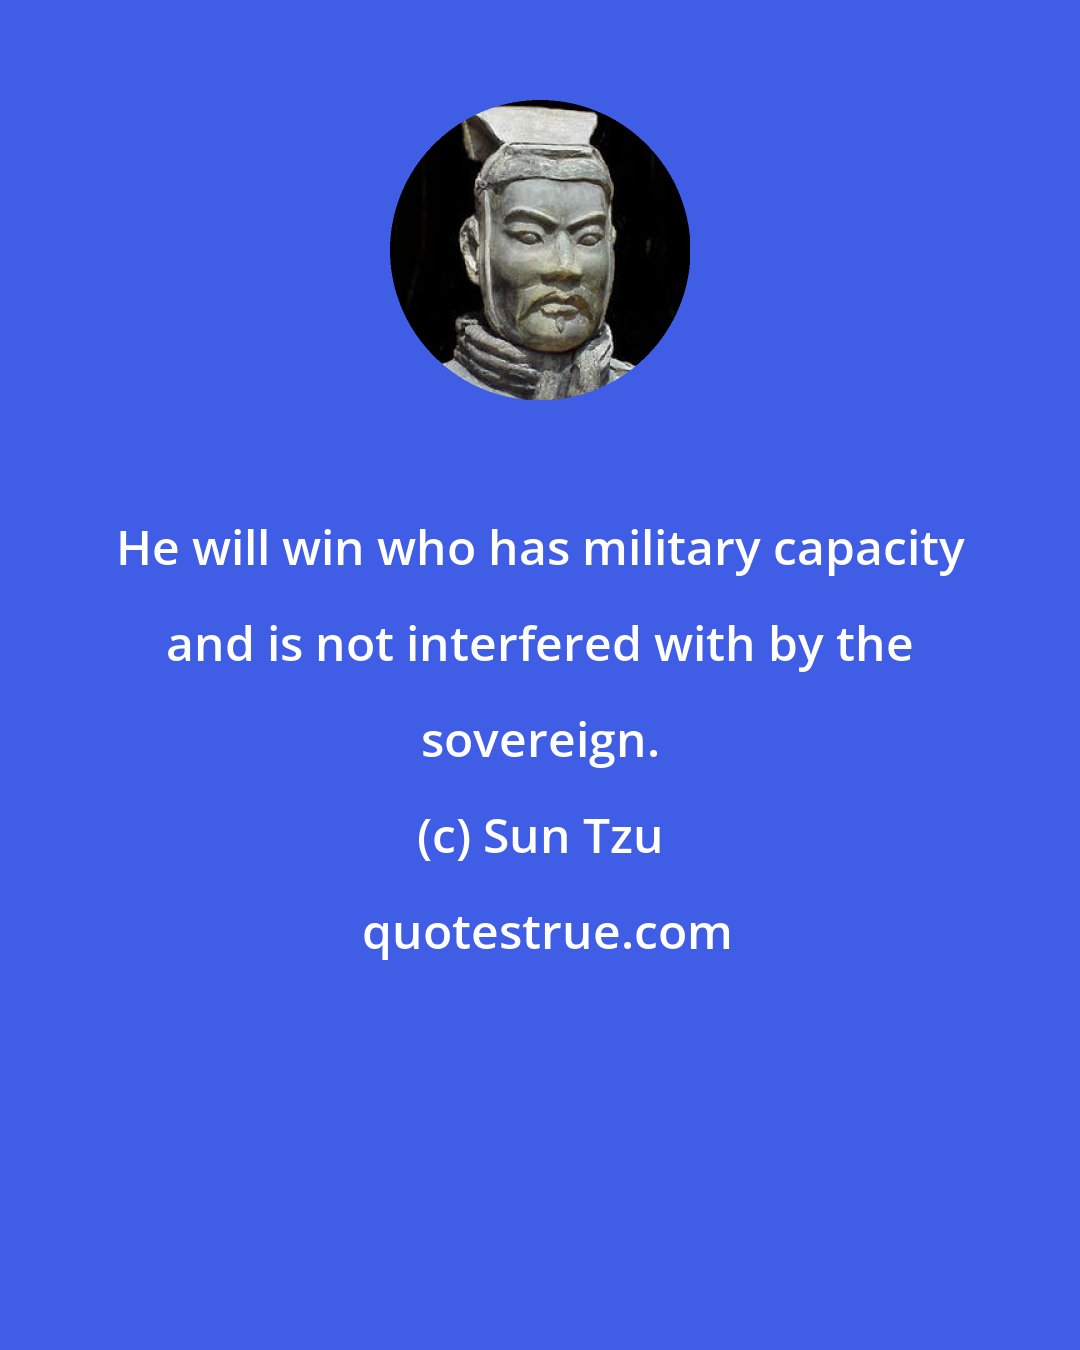 Sun Tzu: He will win who has military capacity and is not interfered with by the sovereign.